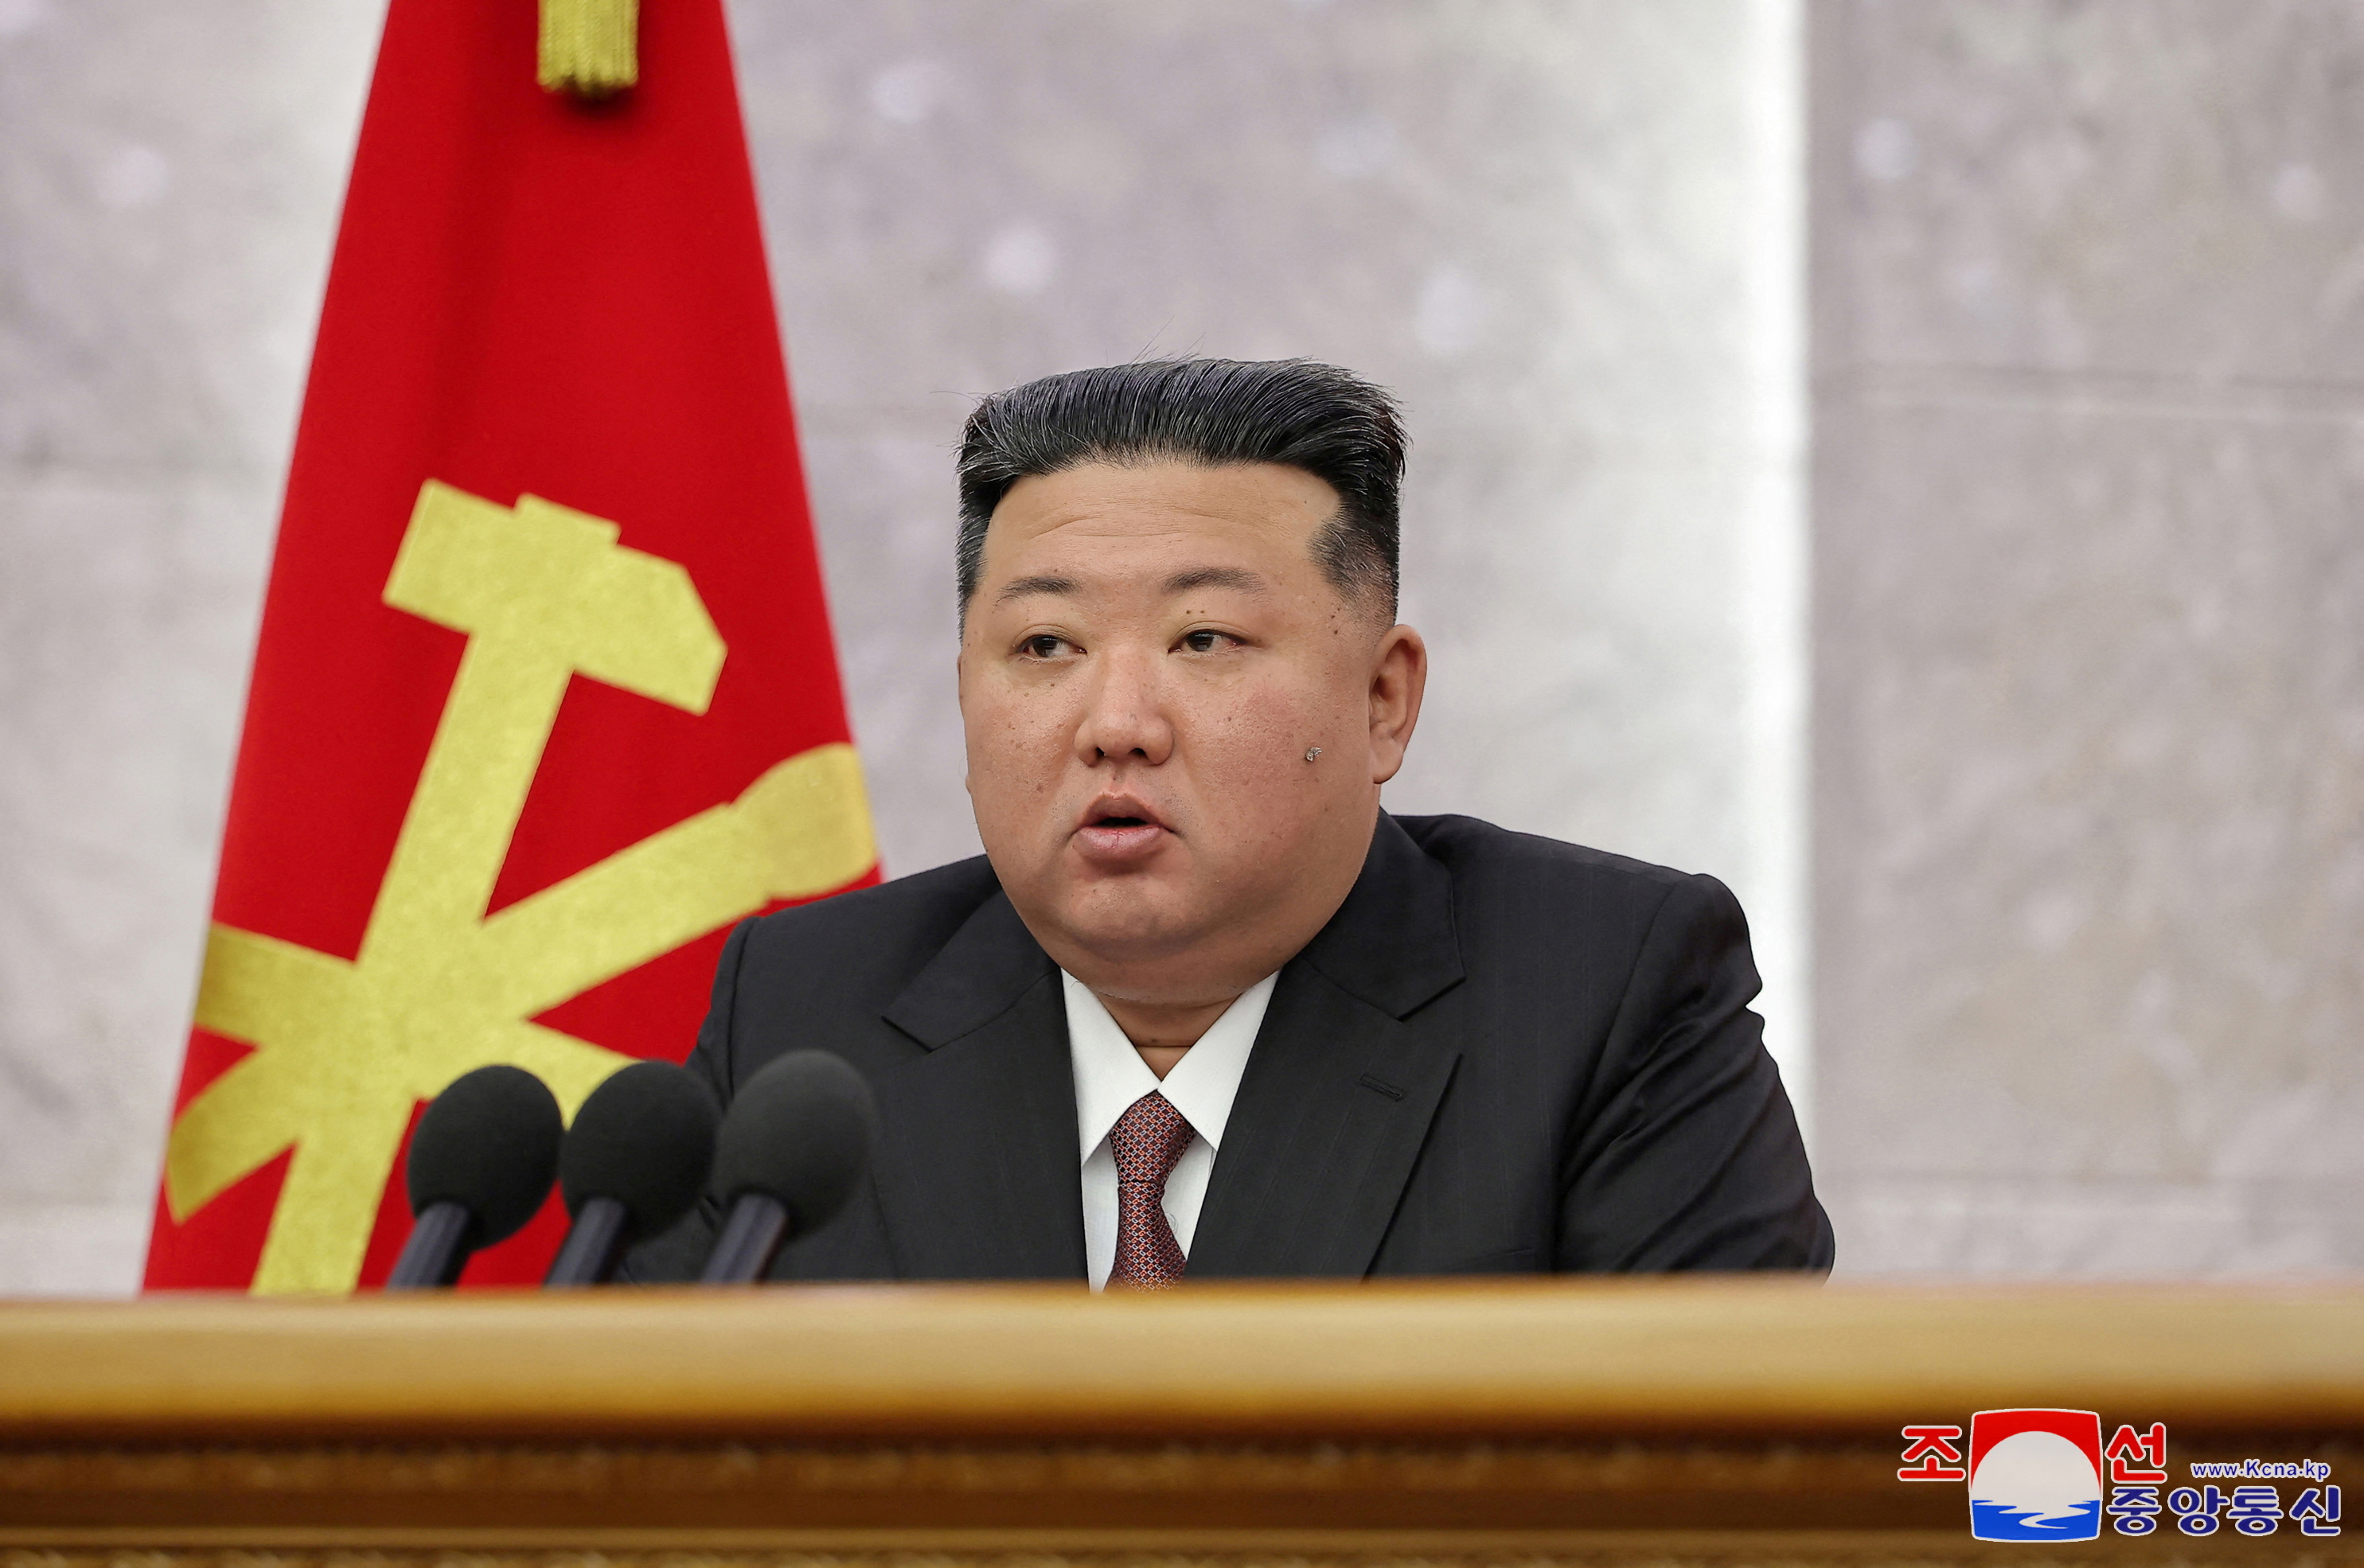 North Korean leader Kim Jong Un chairs a key meeting of the country's ruling party in Pyongyang